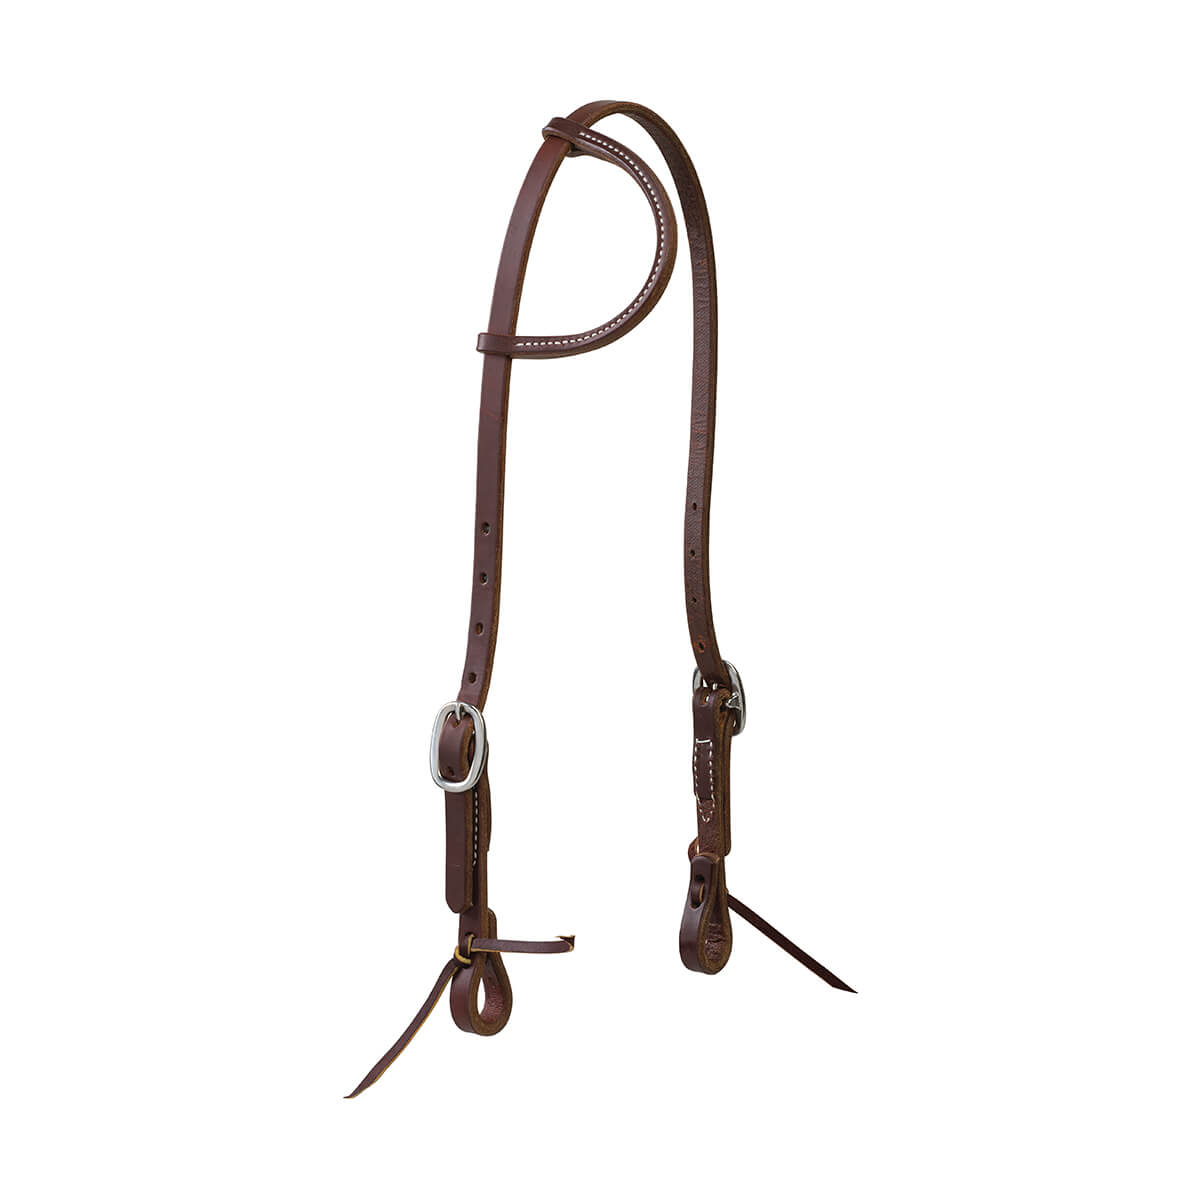 Working Tack Sliding Ear Headstall - 5/8-in